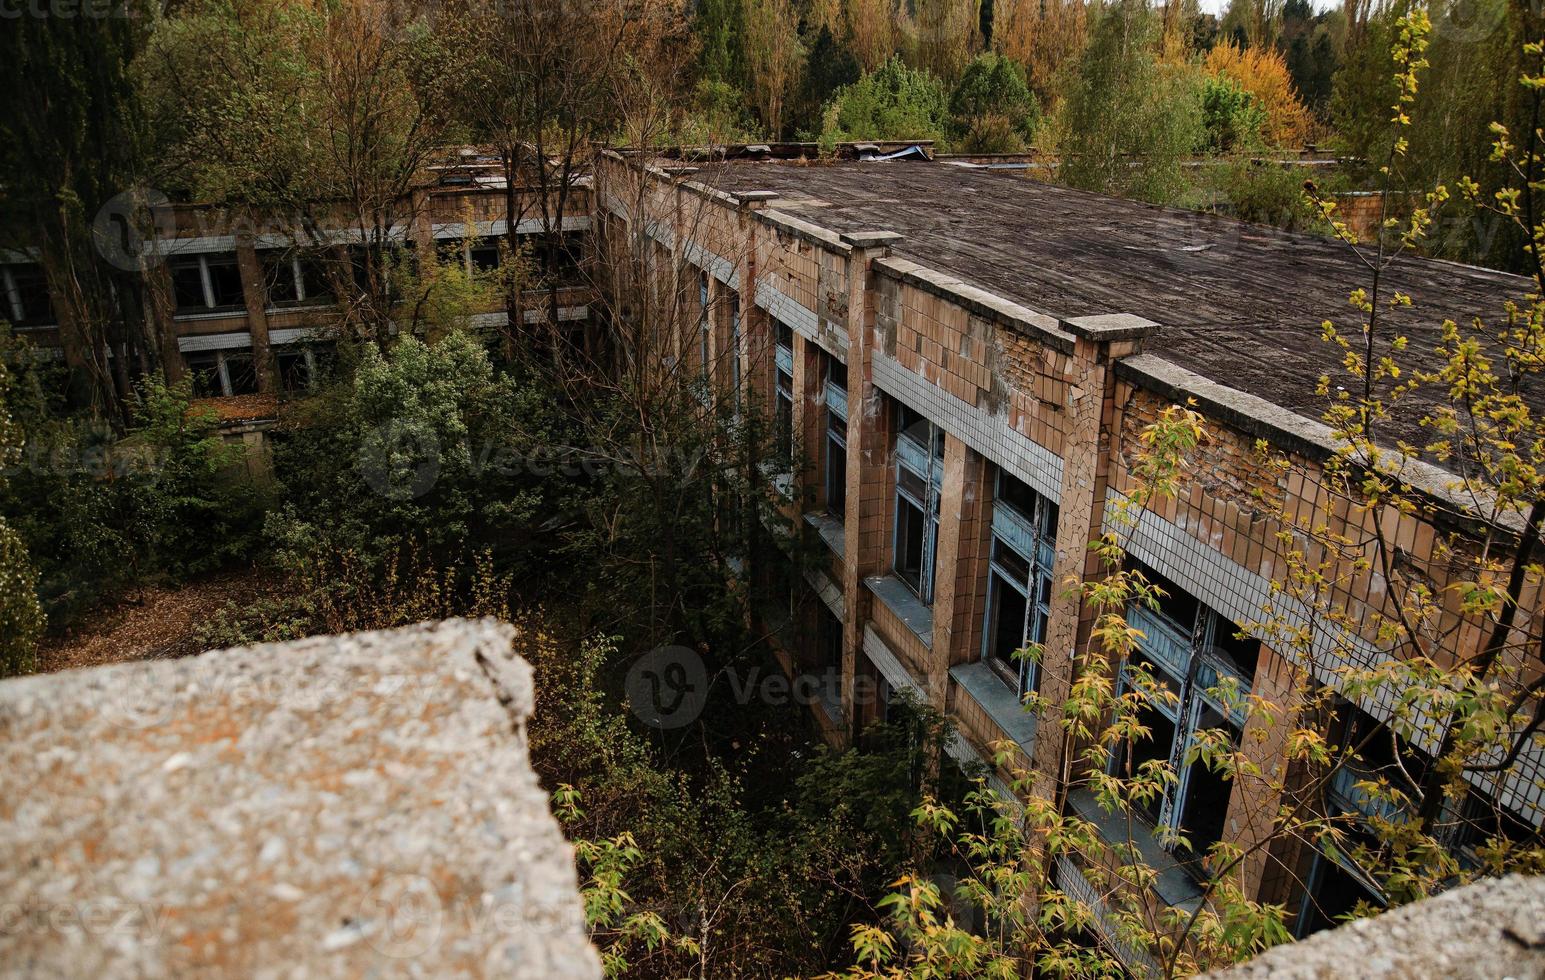 Chernobyl exclusion zone with ruins of abandoned pripyat city zone of radioactivity ghost town. photo